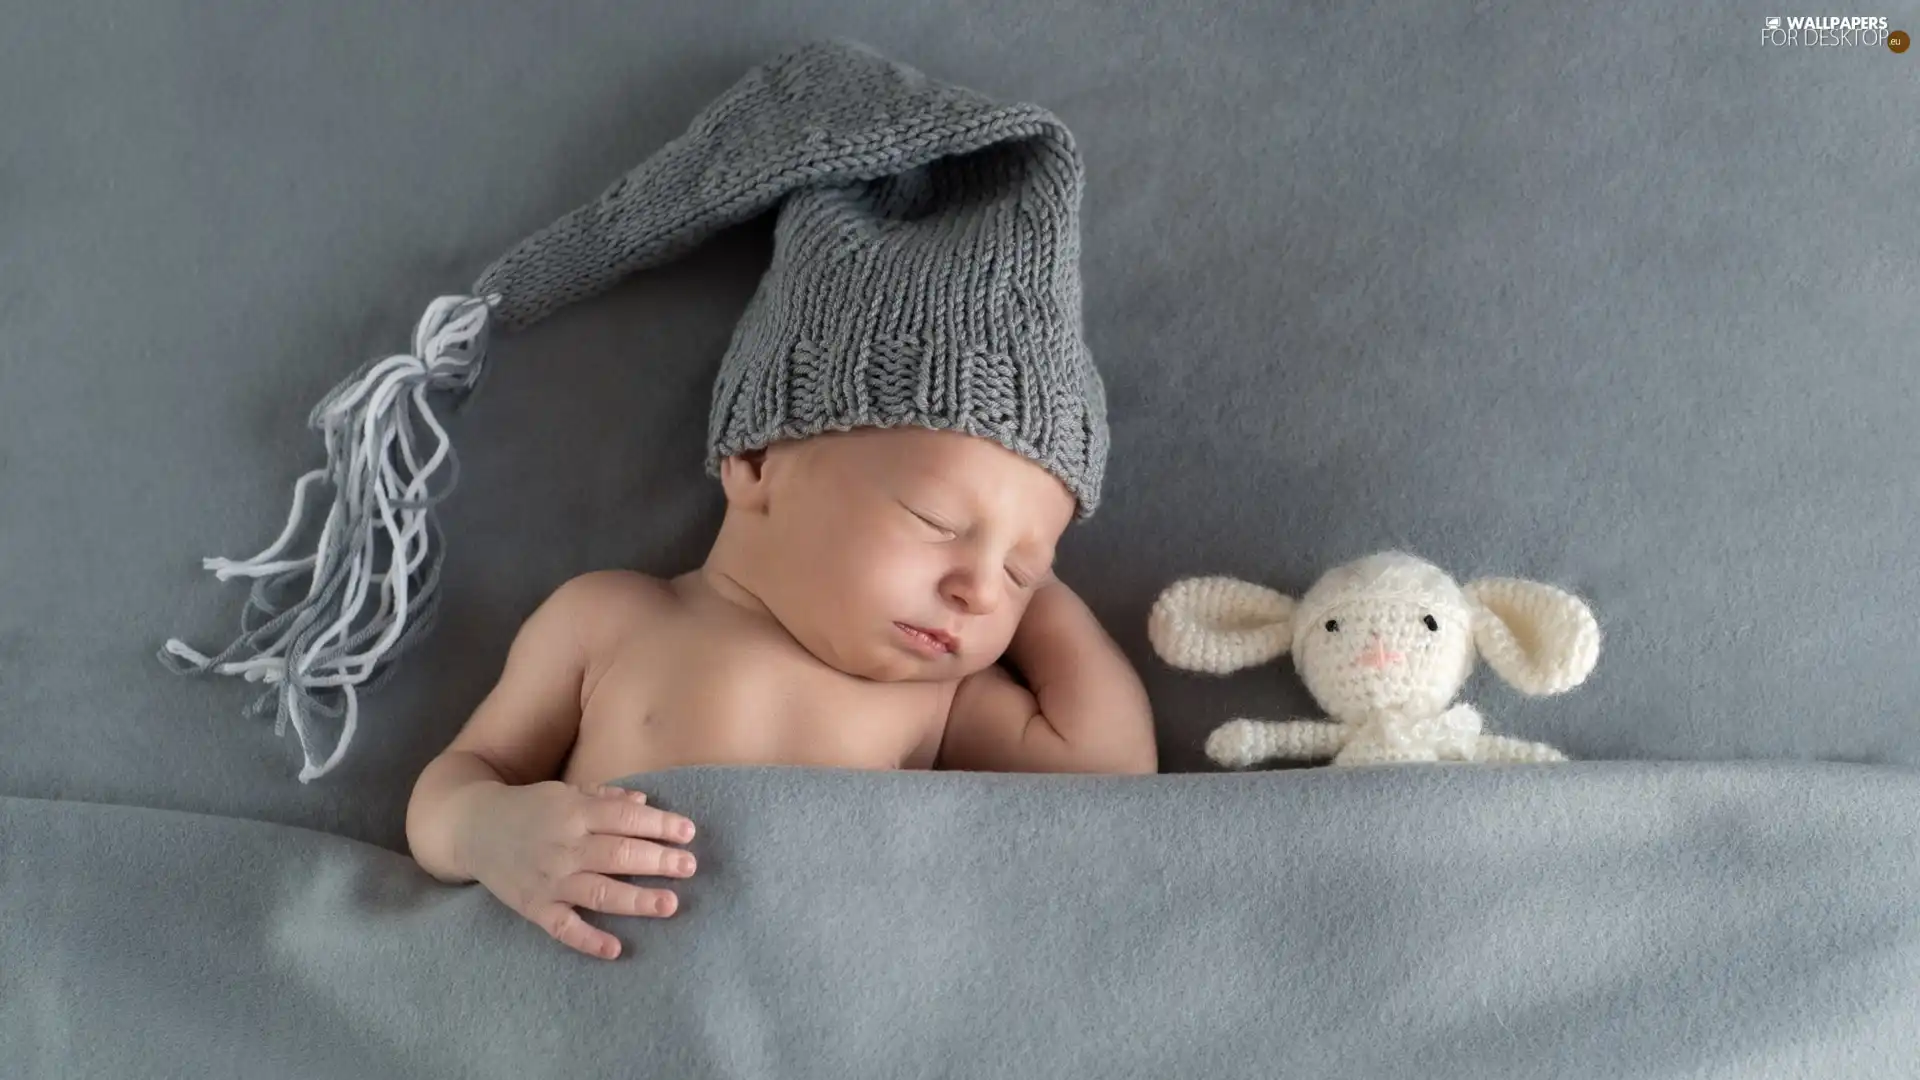 dream, Gray, sheep, Hat, cuddly, babe, Kid, coverlet